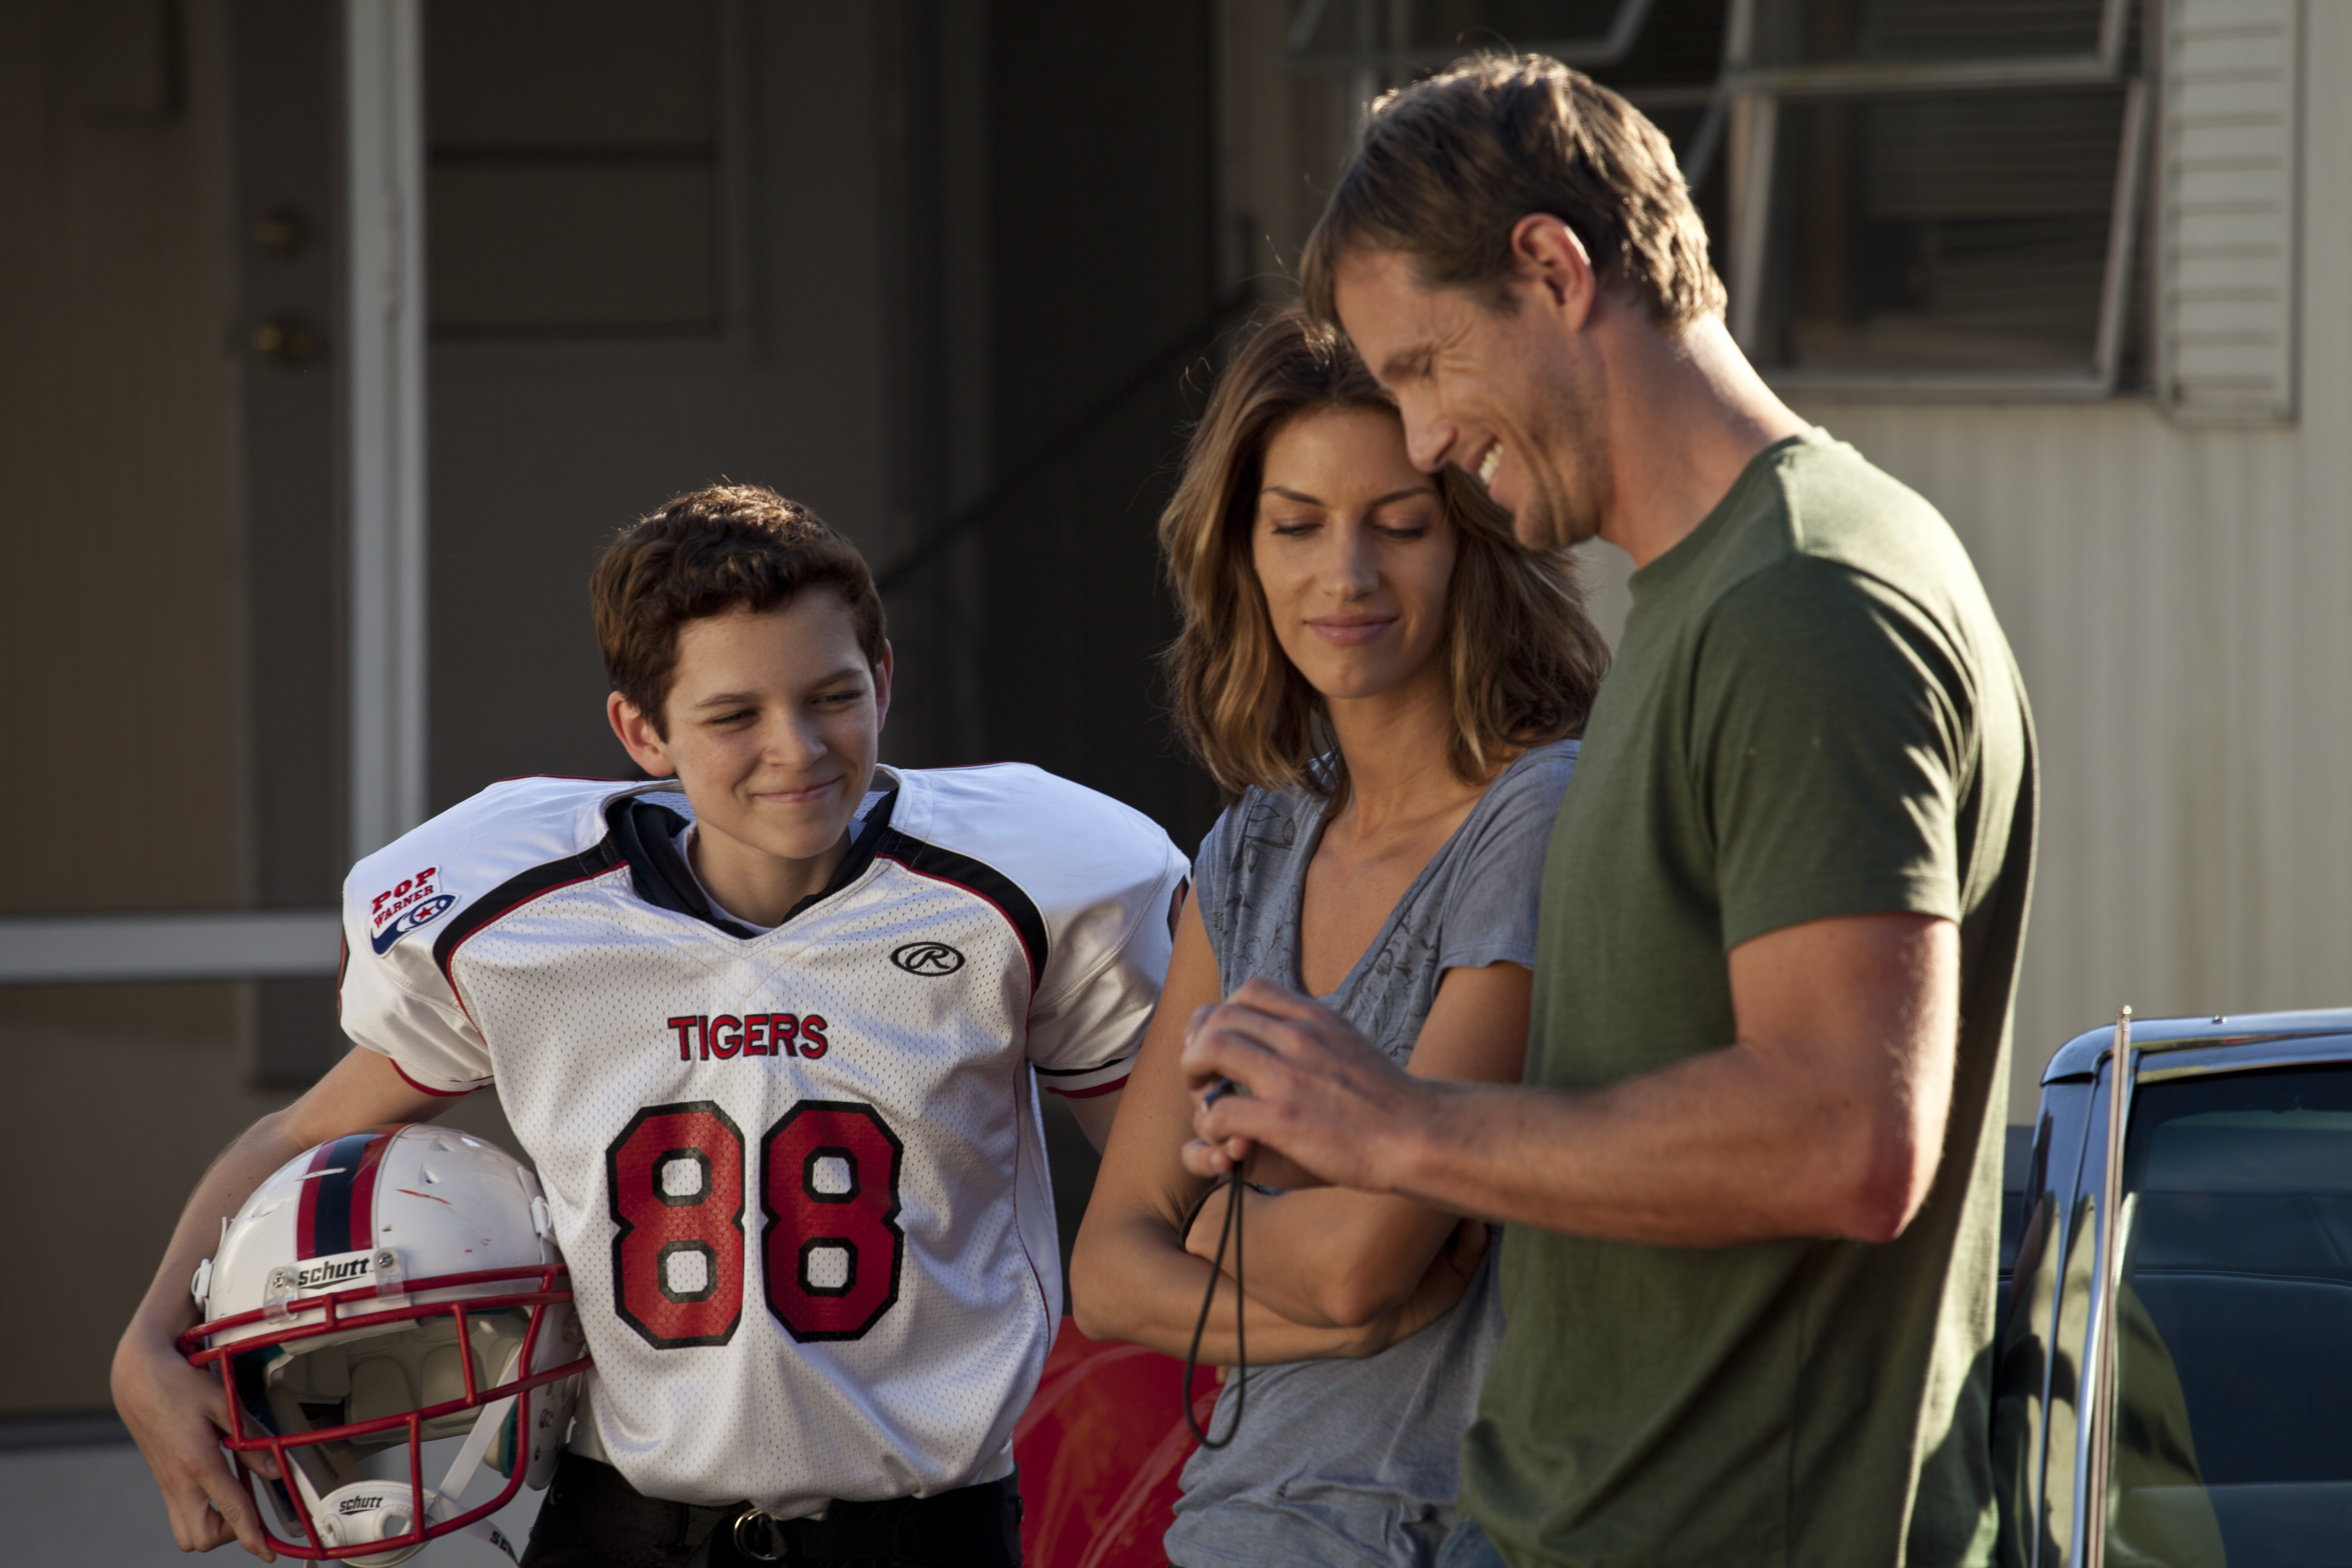 Connor Christie, Dawn Olivieri and Kip Pardue in 